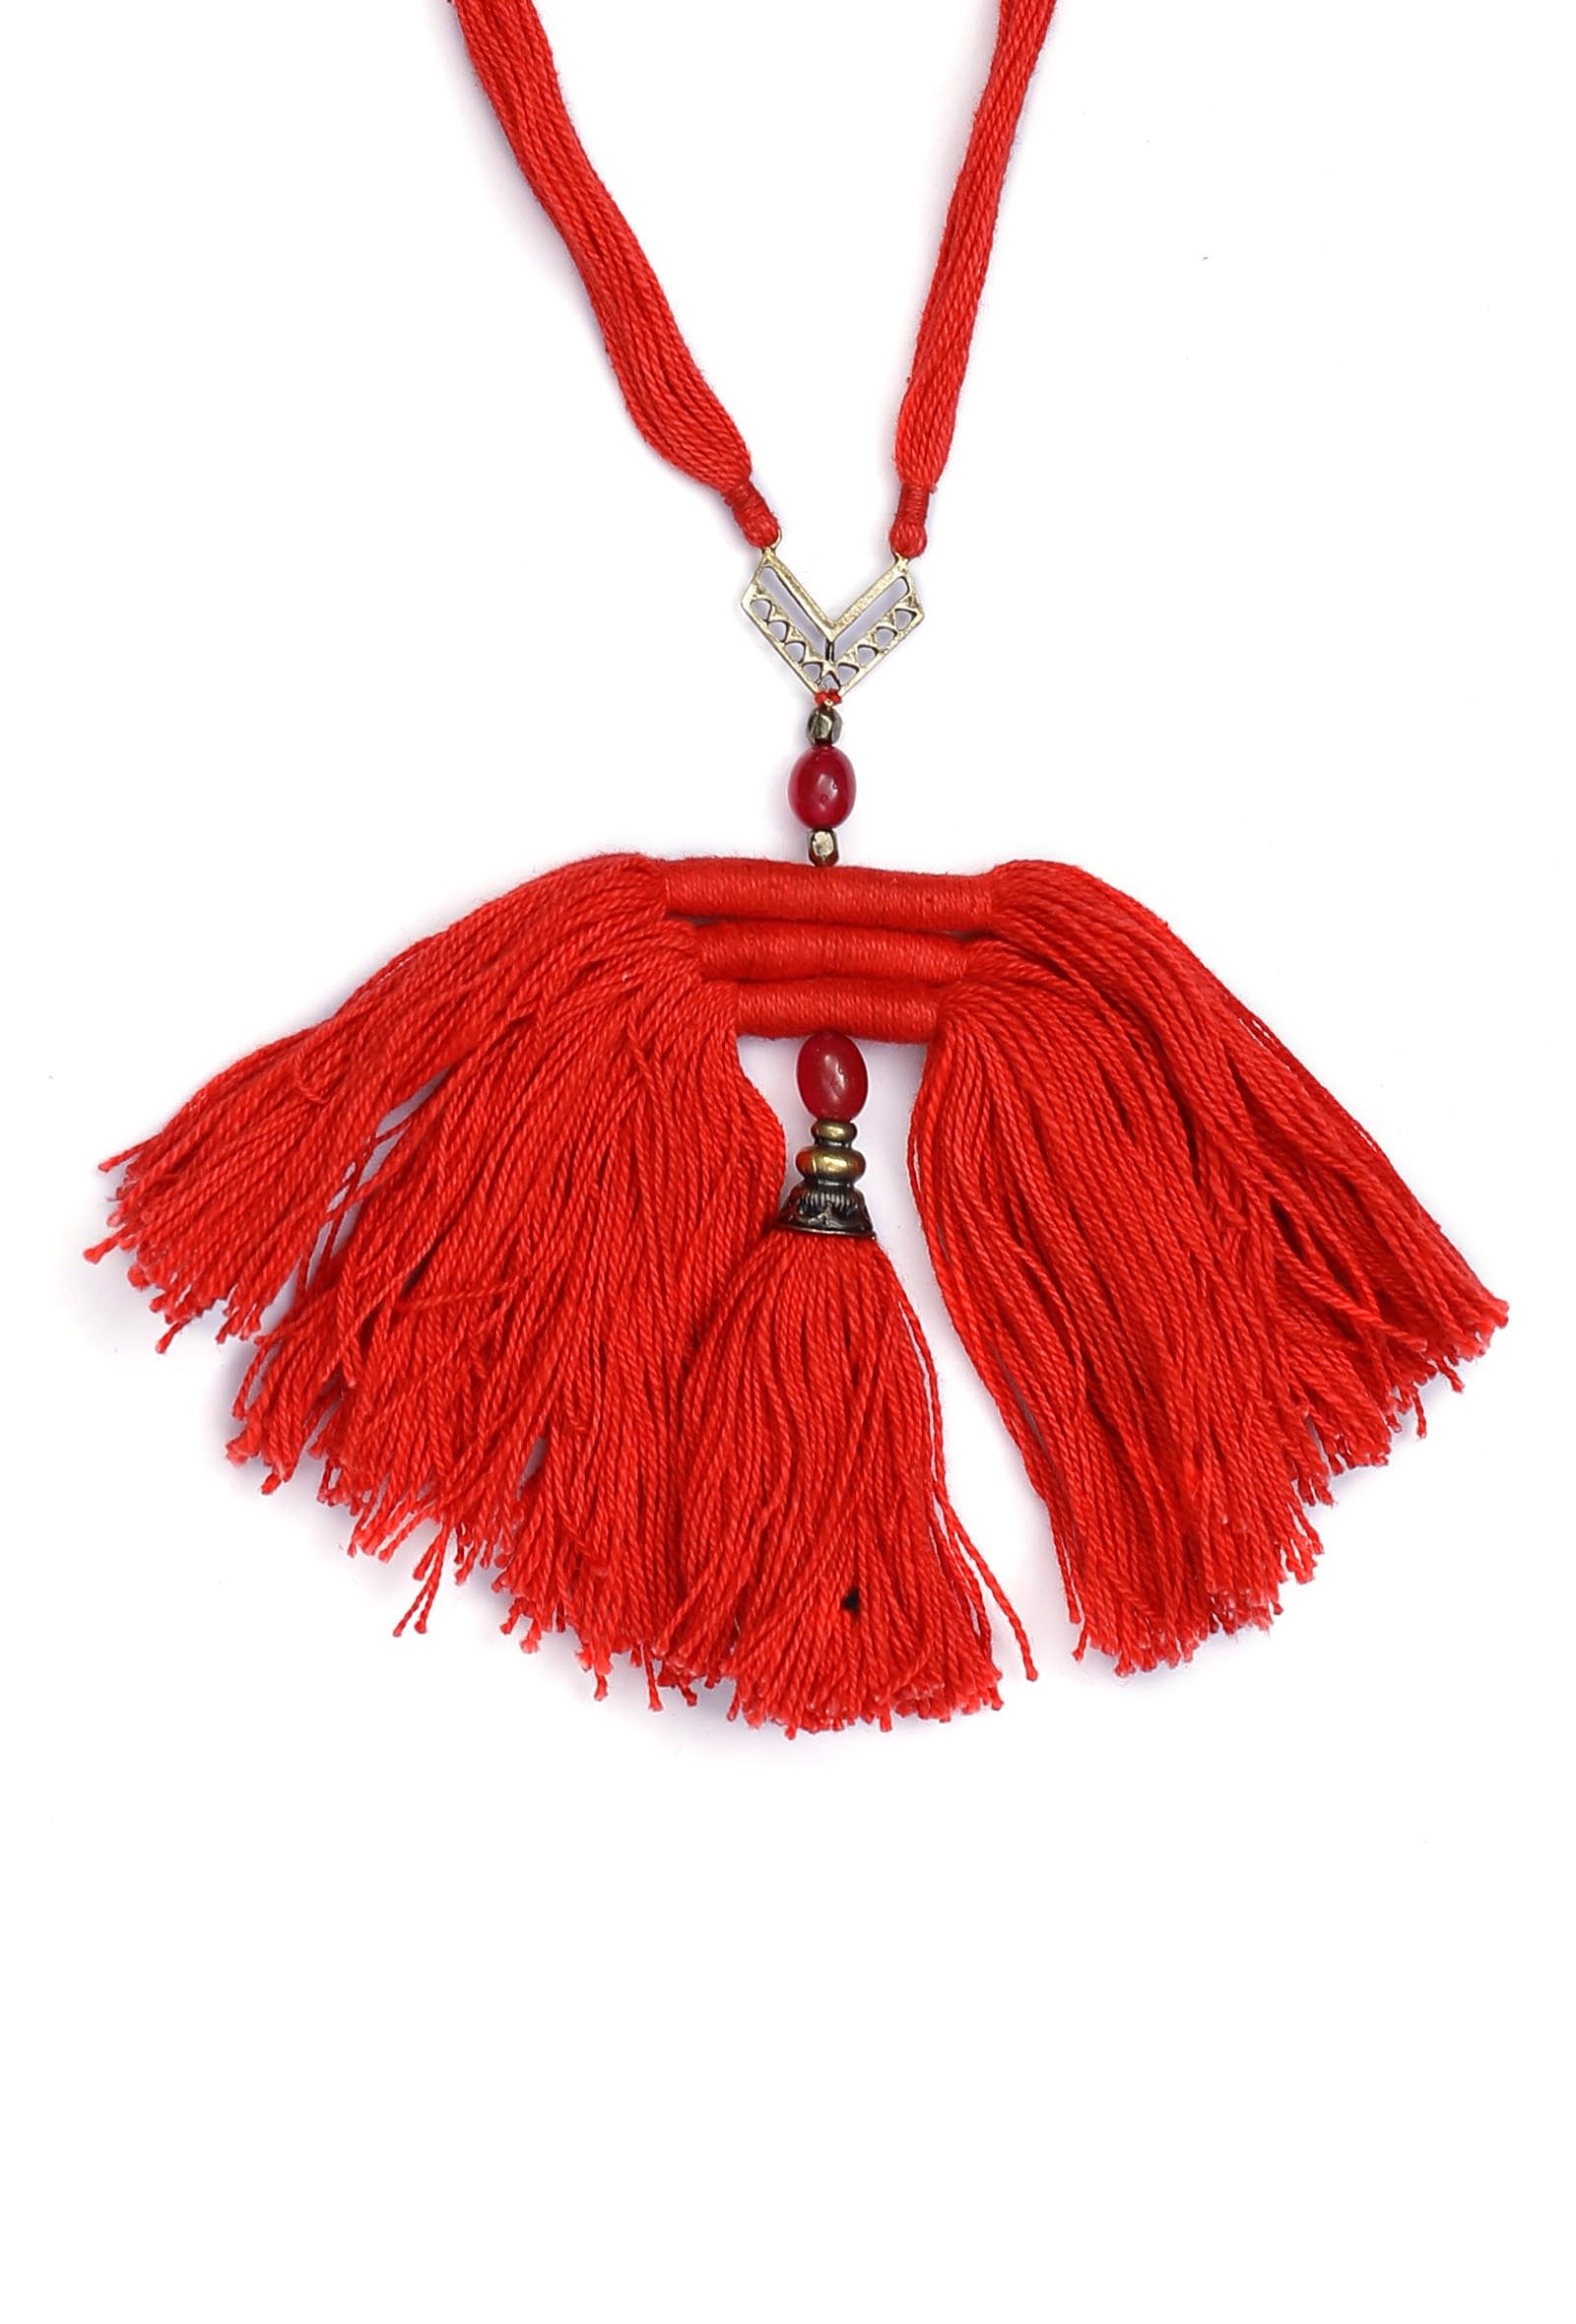 Scarlet Red Thread Silver Tribal Necklace